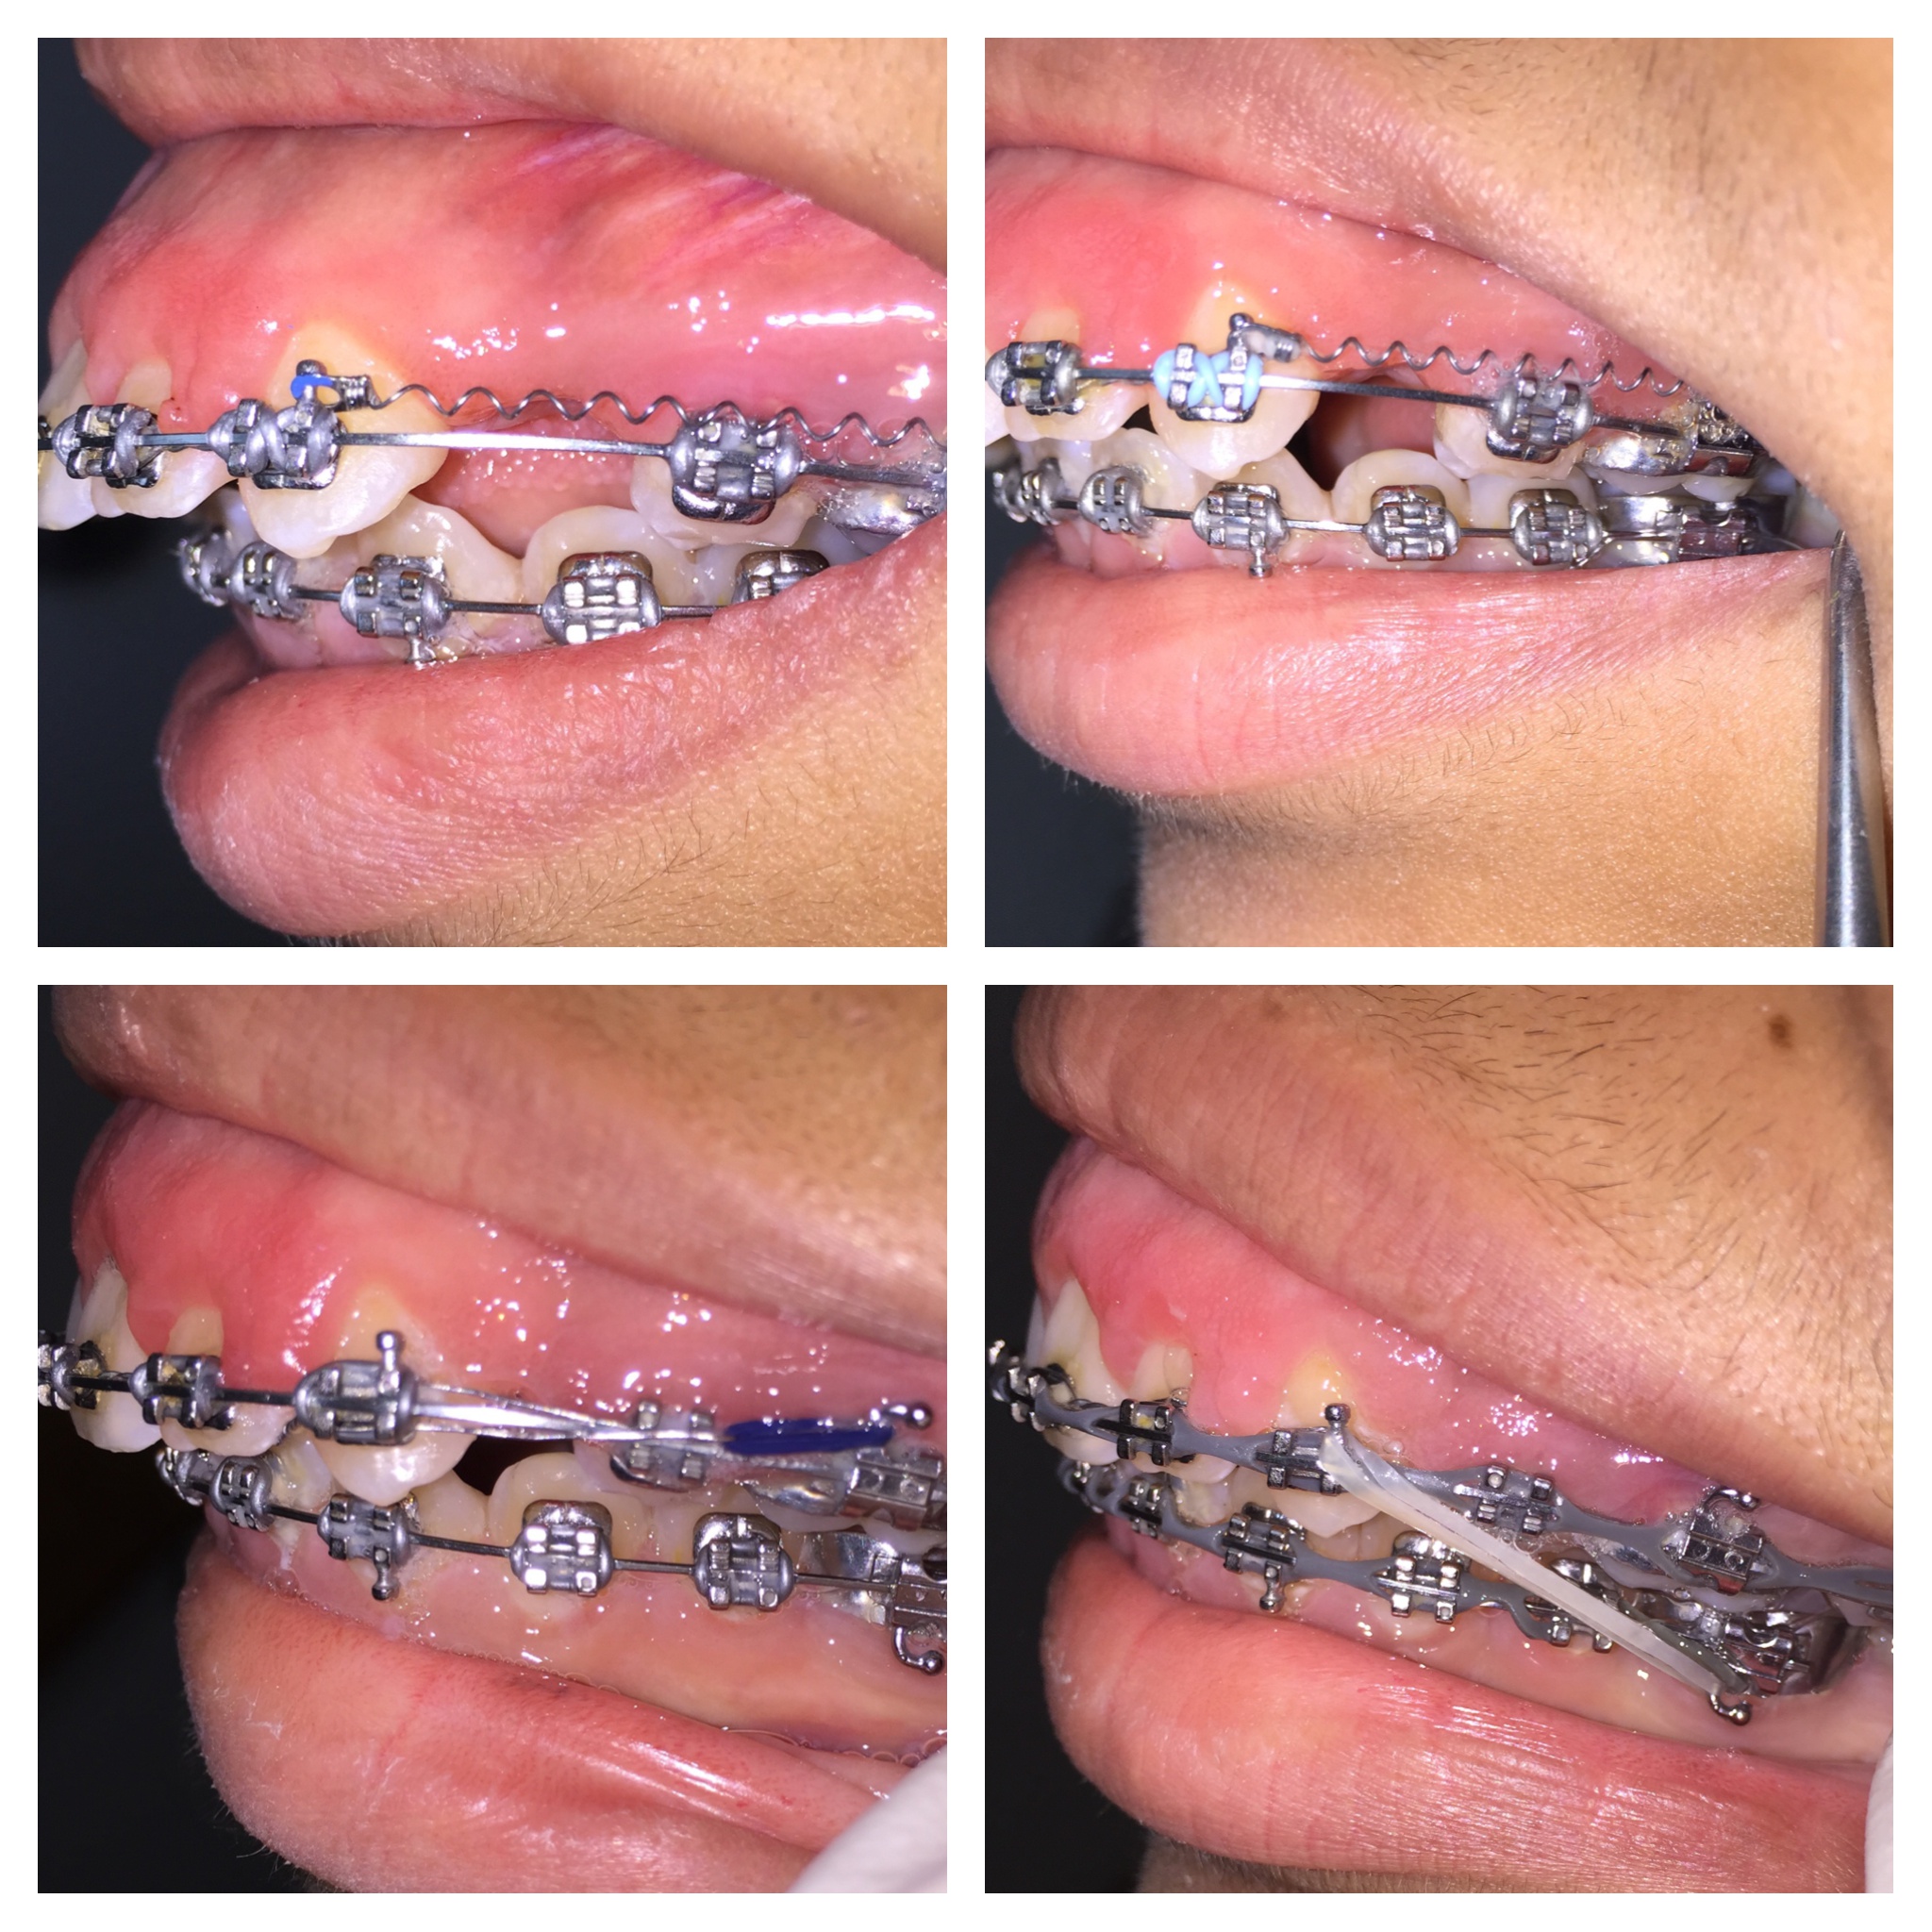 How To Correct Overbite With Braces Overbite Correction Without